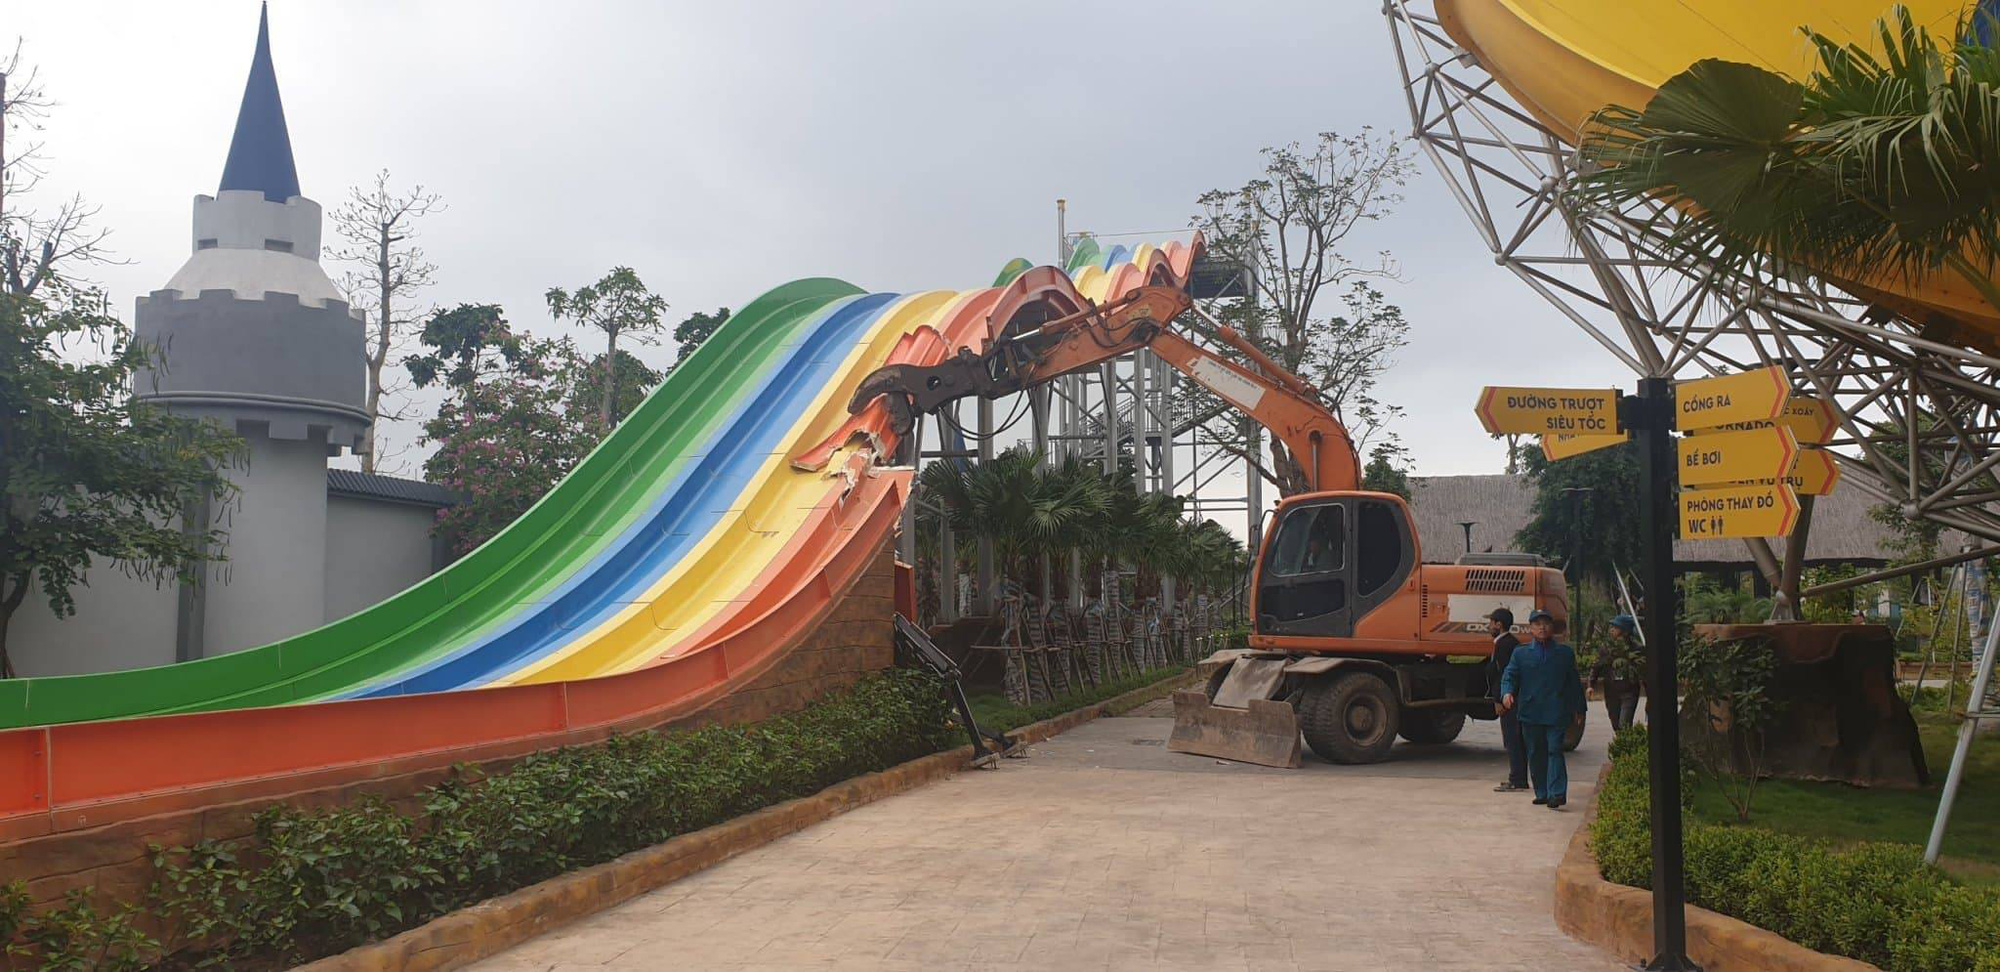 Hanoi’s largest water park demolished 6 months after opening